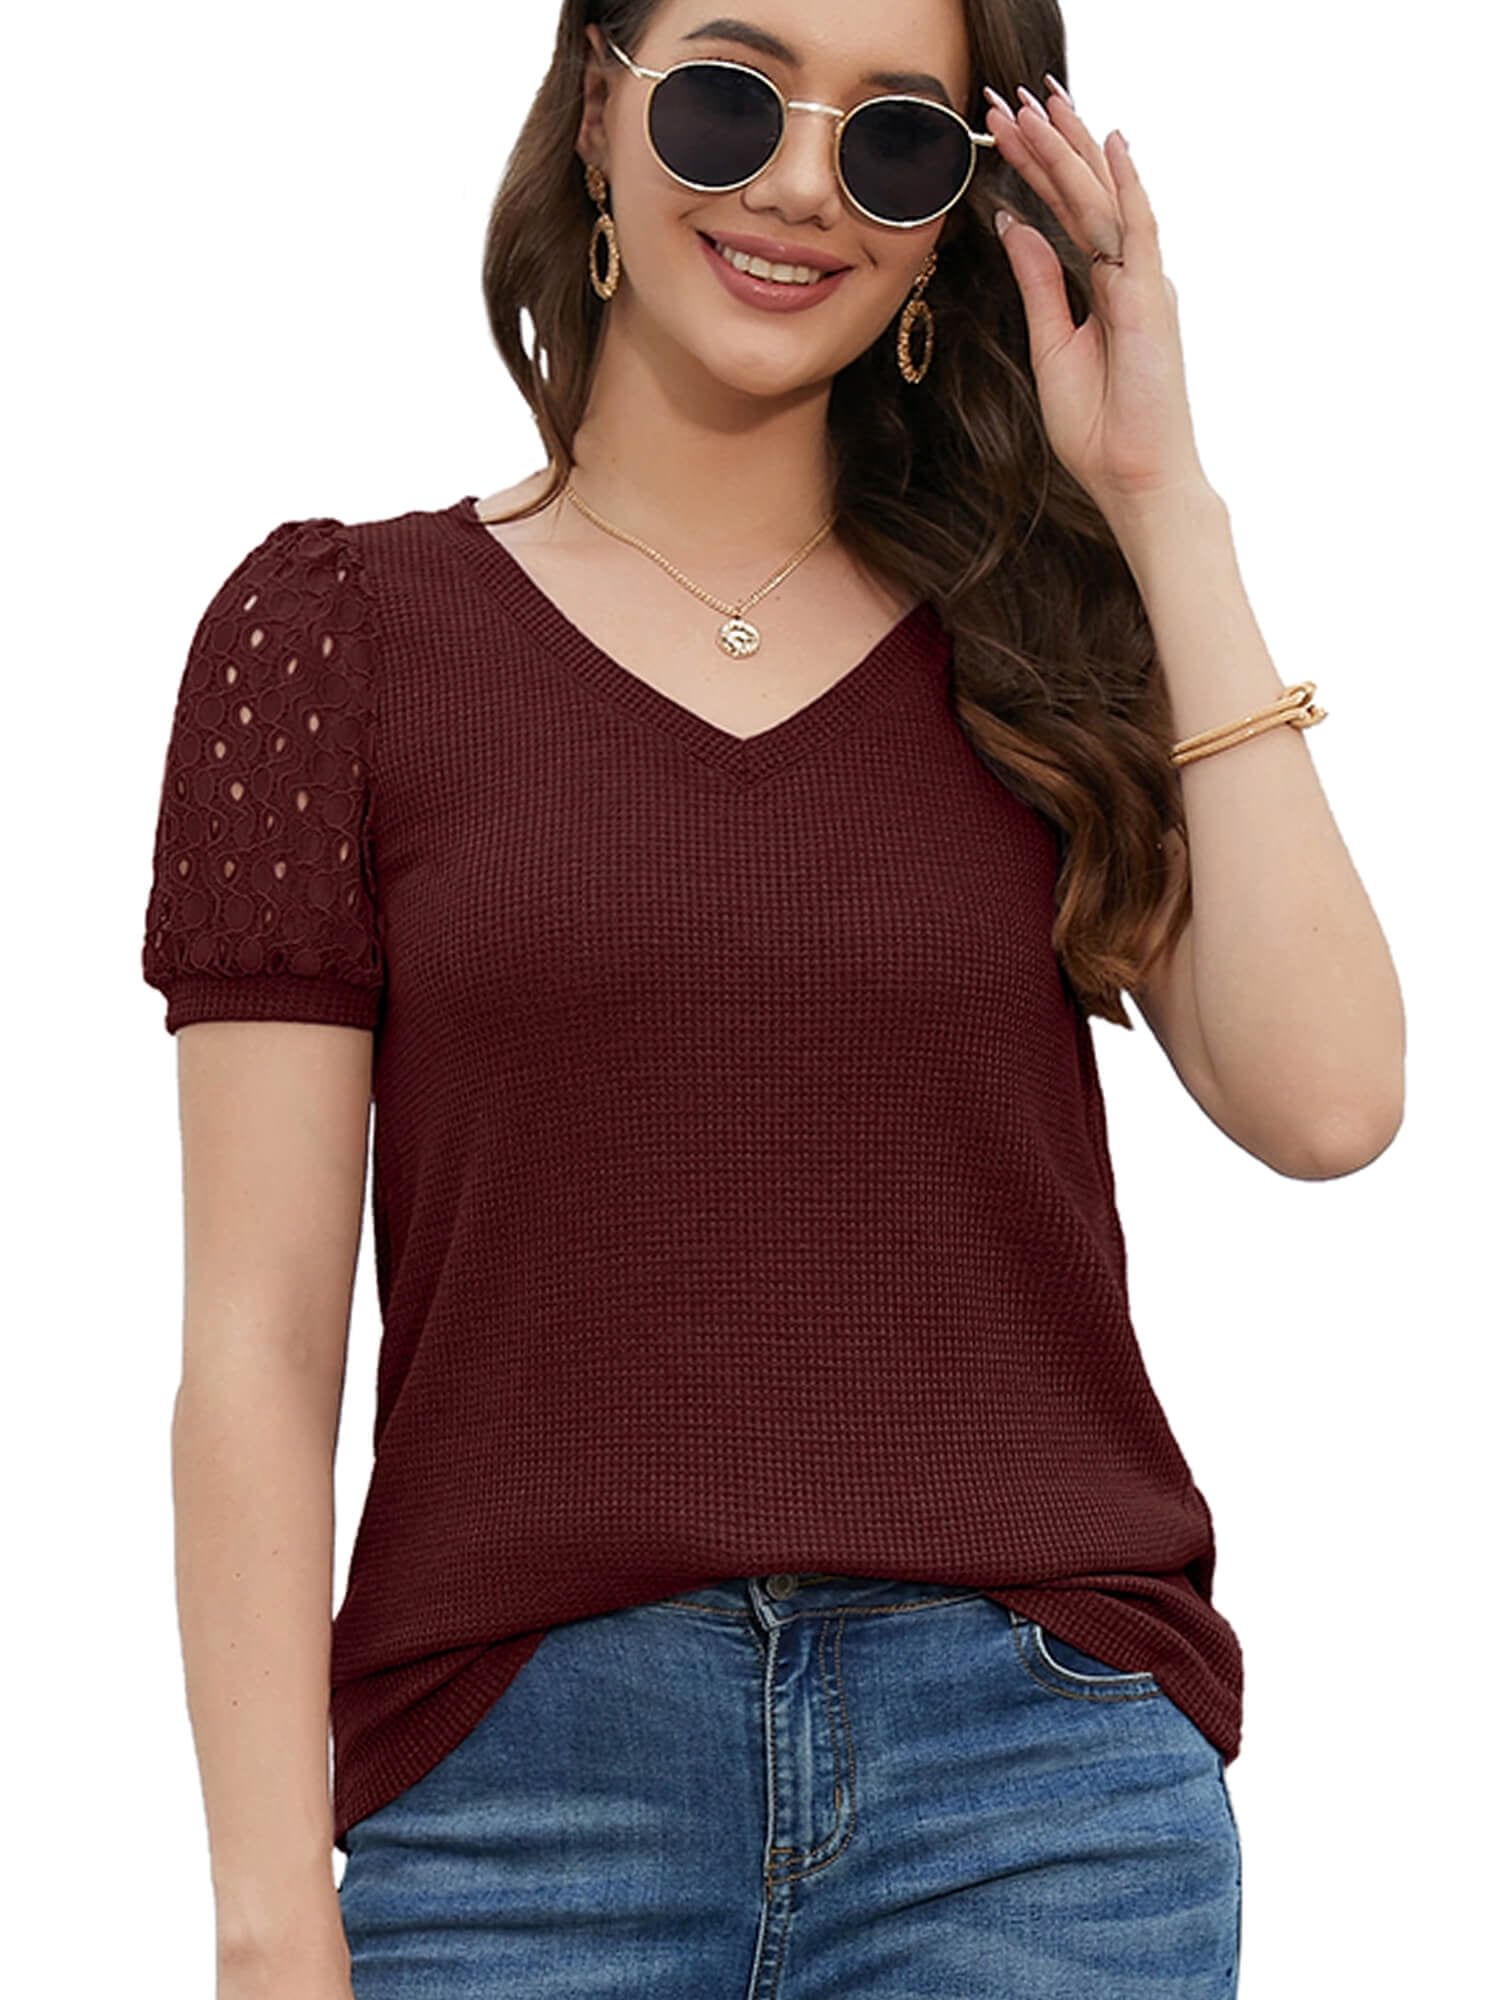 SHOWMALL Women's Trendy Waffle Knit Blouse Puff Short Sleeve Hollow-Out ...